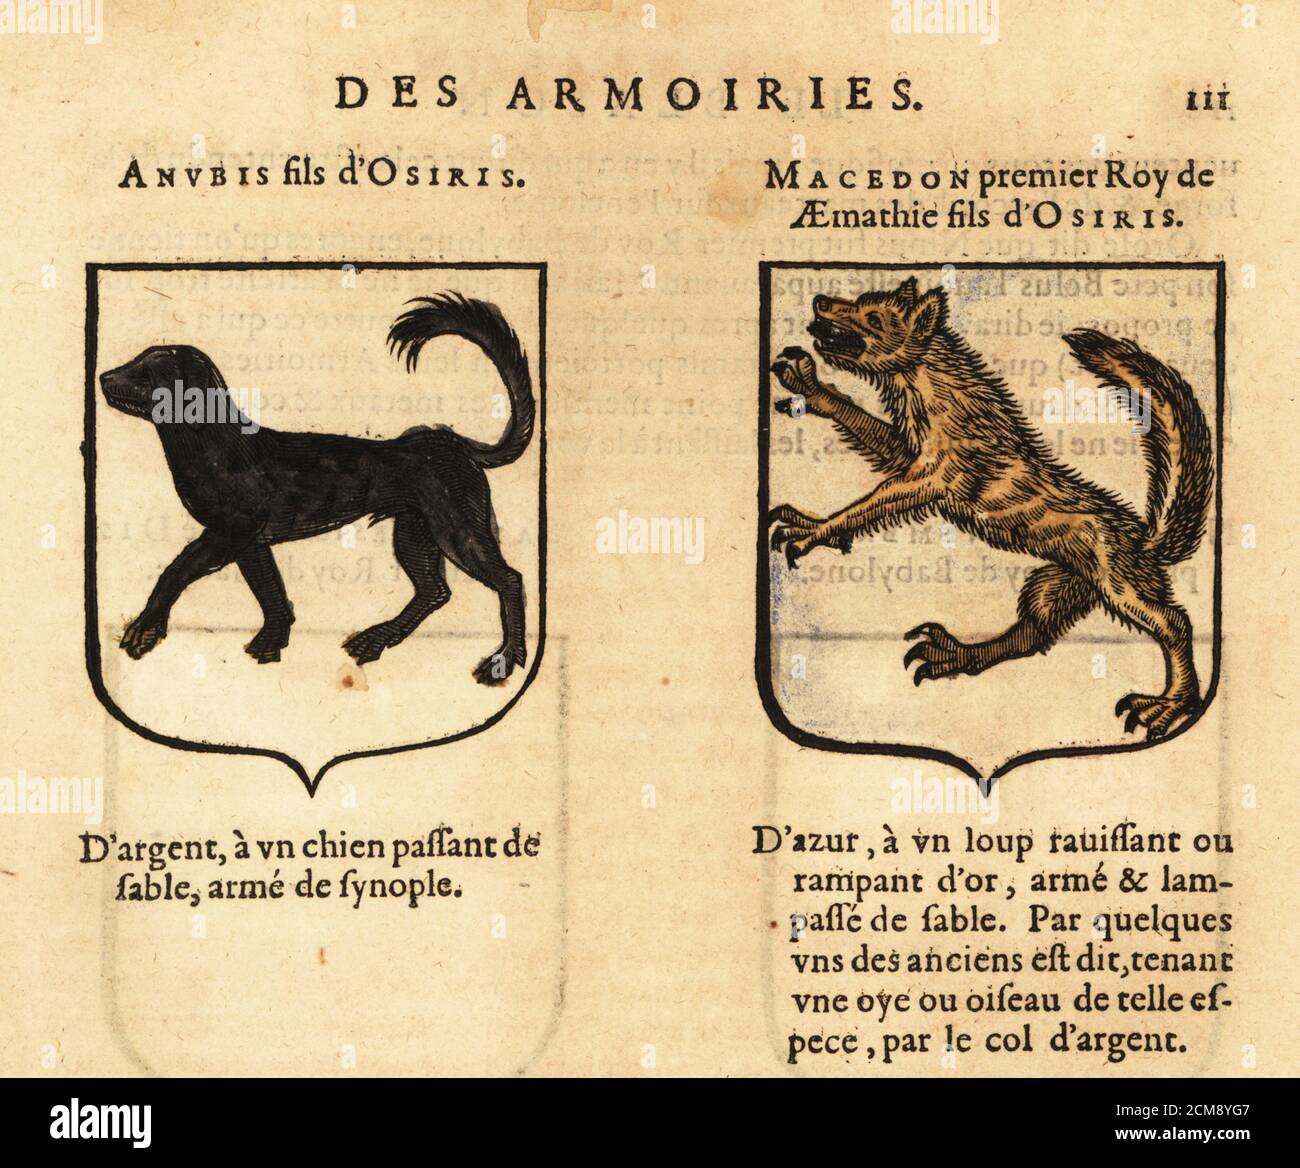 Coats of arms of mythological figures Anubis, son of Osiris, and Macedon,  first king of Aemathia, son of Osiris. Anubis fils d'OSIRIS., MACEDON  premier Roy de Aemathie fils d'OSIRIS. Handcoloured woodblock engraving